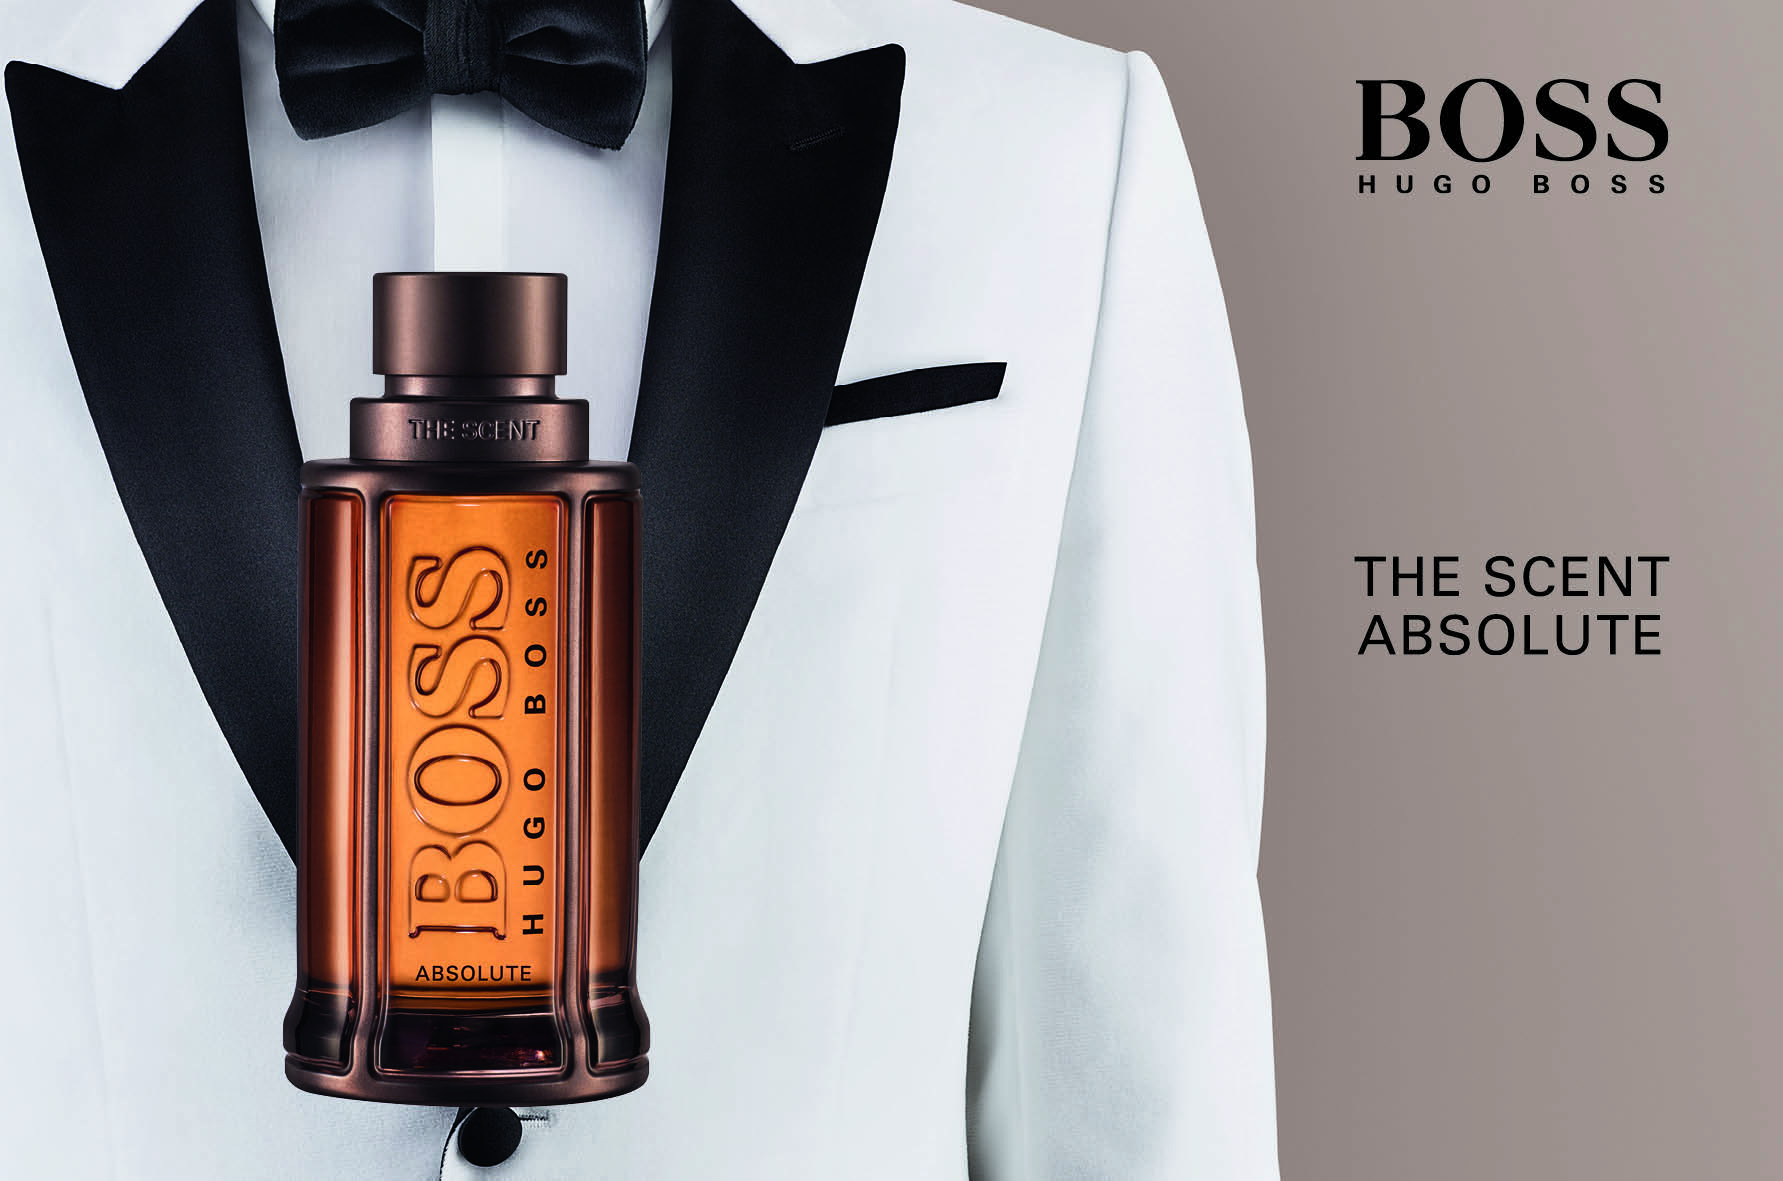 Le scent hugo boss. Hugo Boss the Scent absolute. Boss Scent absolute мужской. Hugo Boss absolute мужские. Духи Boss the Scent absolute for him.